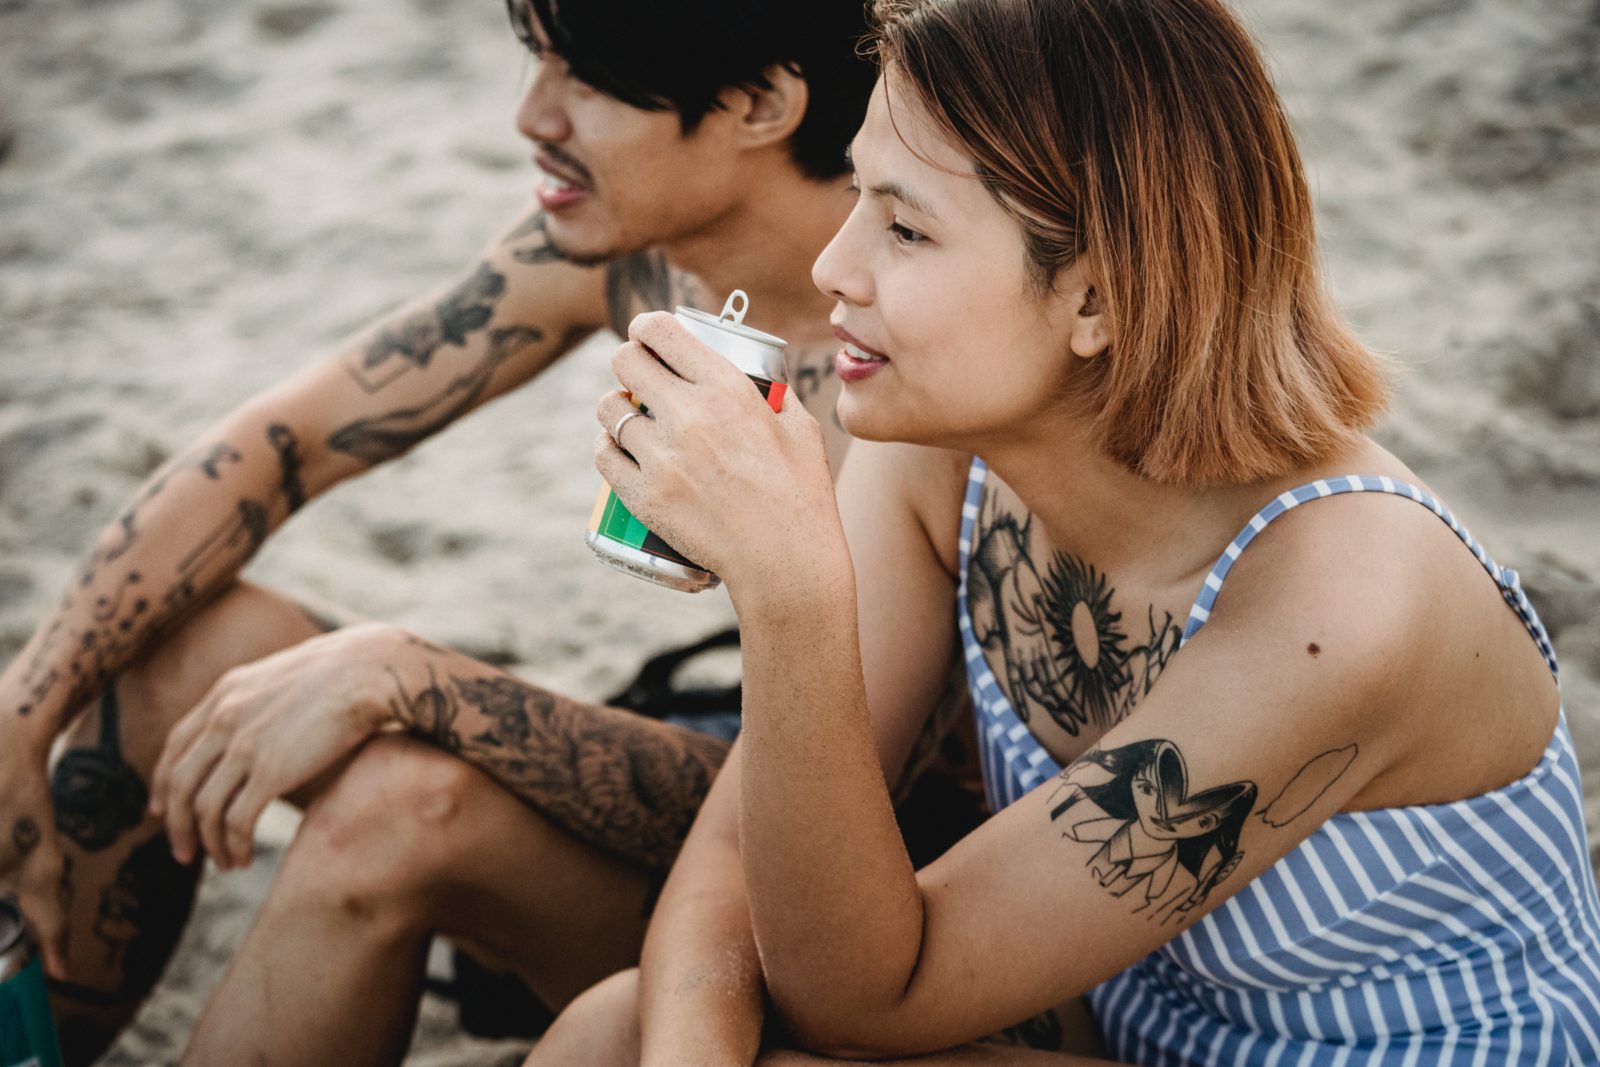 Young people drinking canned wine on the beach. Alternative wine packaging types can be more appealing to younger demographics.